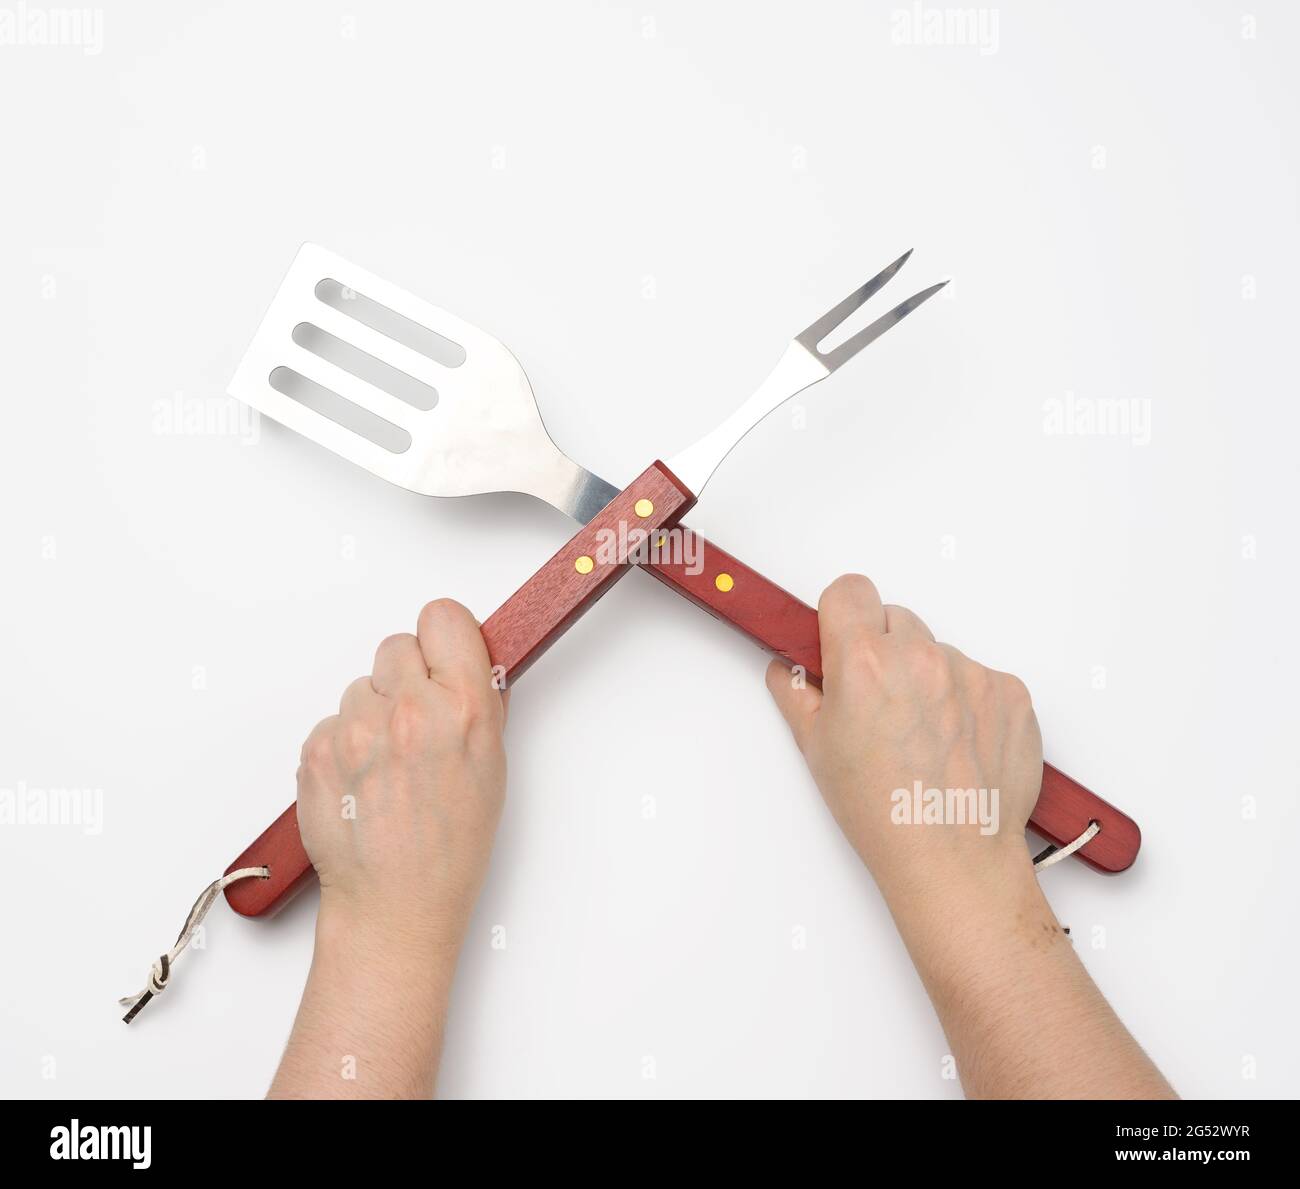 metal spatula and fork with a wooden handle for a picnic in a female hand  with painted red nails on a white background, utensils crossed Stock Photo  - Alamy